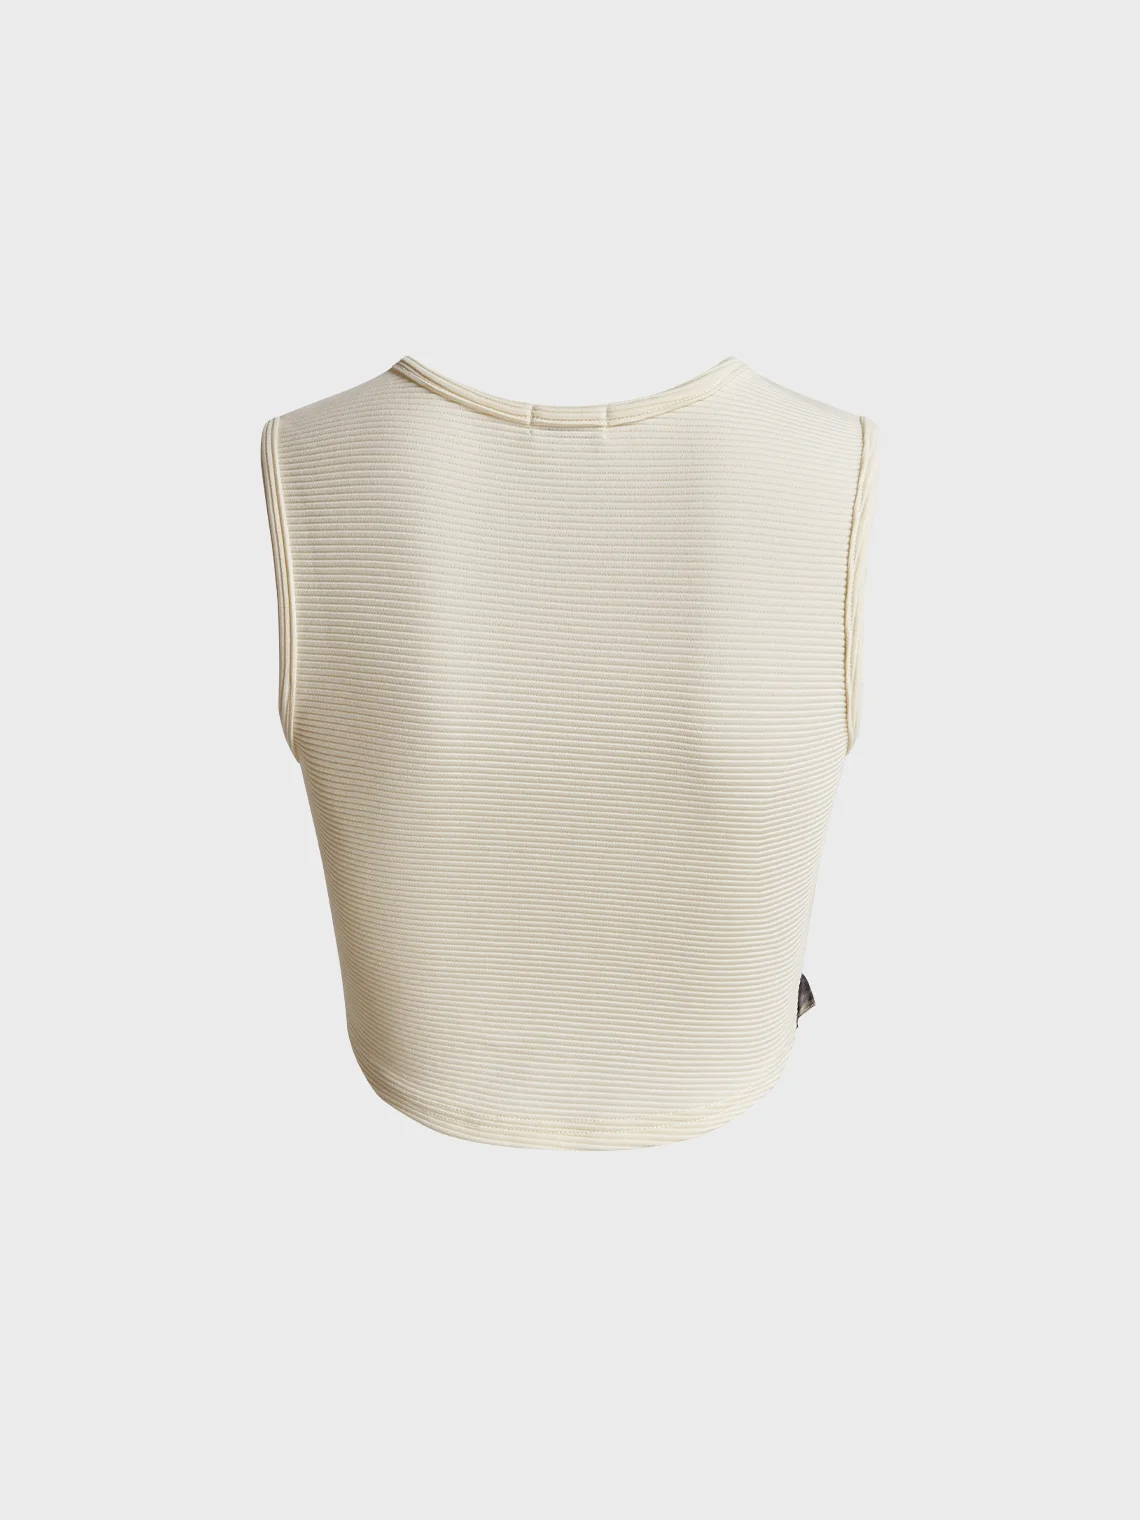 【Final Sale】Y2k White Patchwork Top Tank Top & Cami